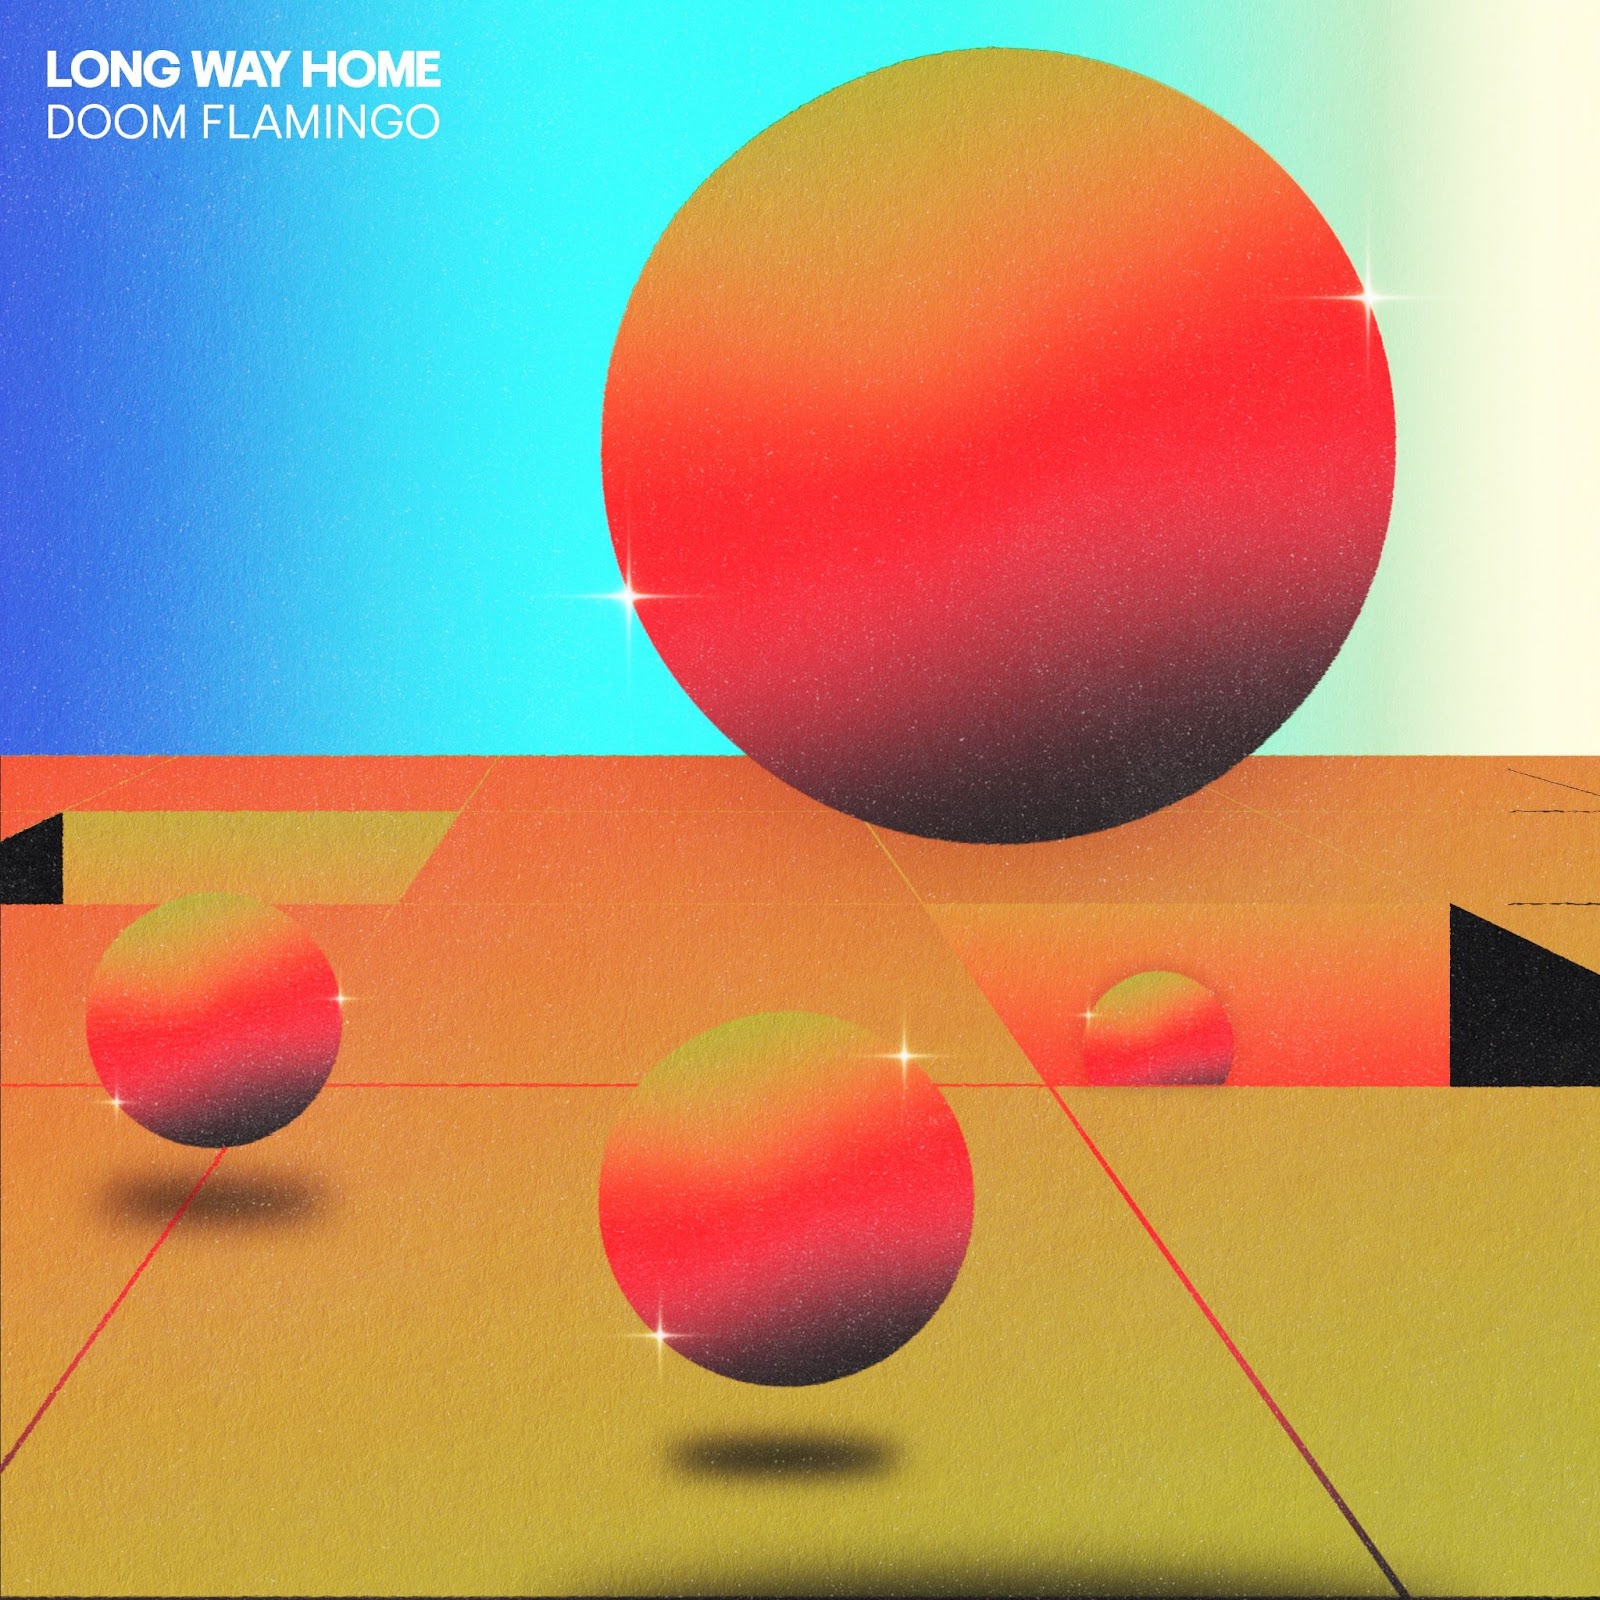  Doom Flamingo & Danny Kalb join forces for Powerful New Single, "Long Way Home"